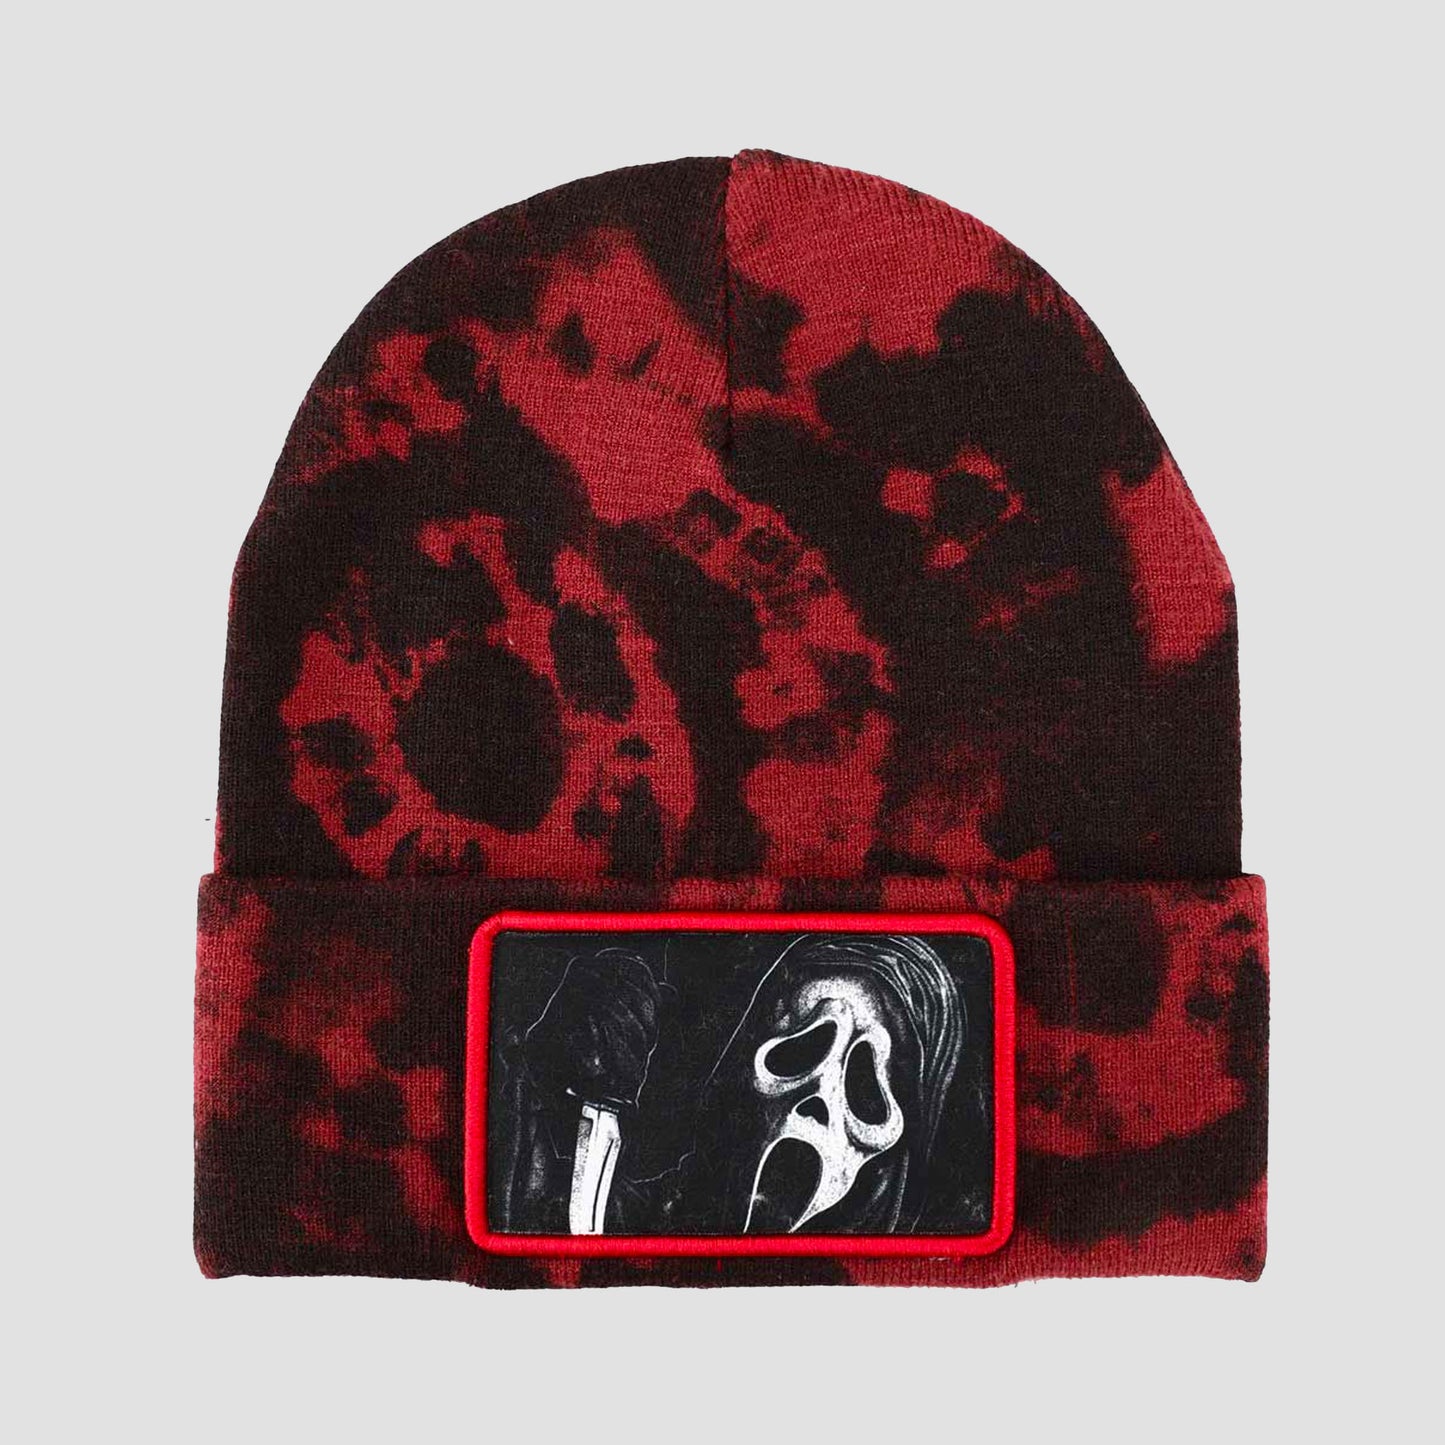 GhostFace (Scream) Sublimated Patch Beanie Hat